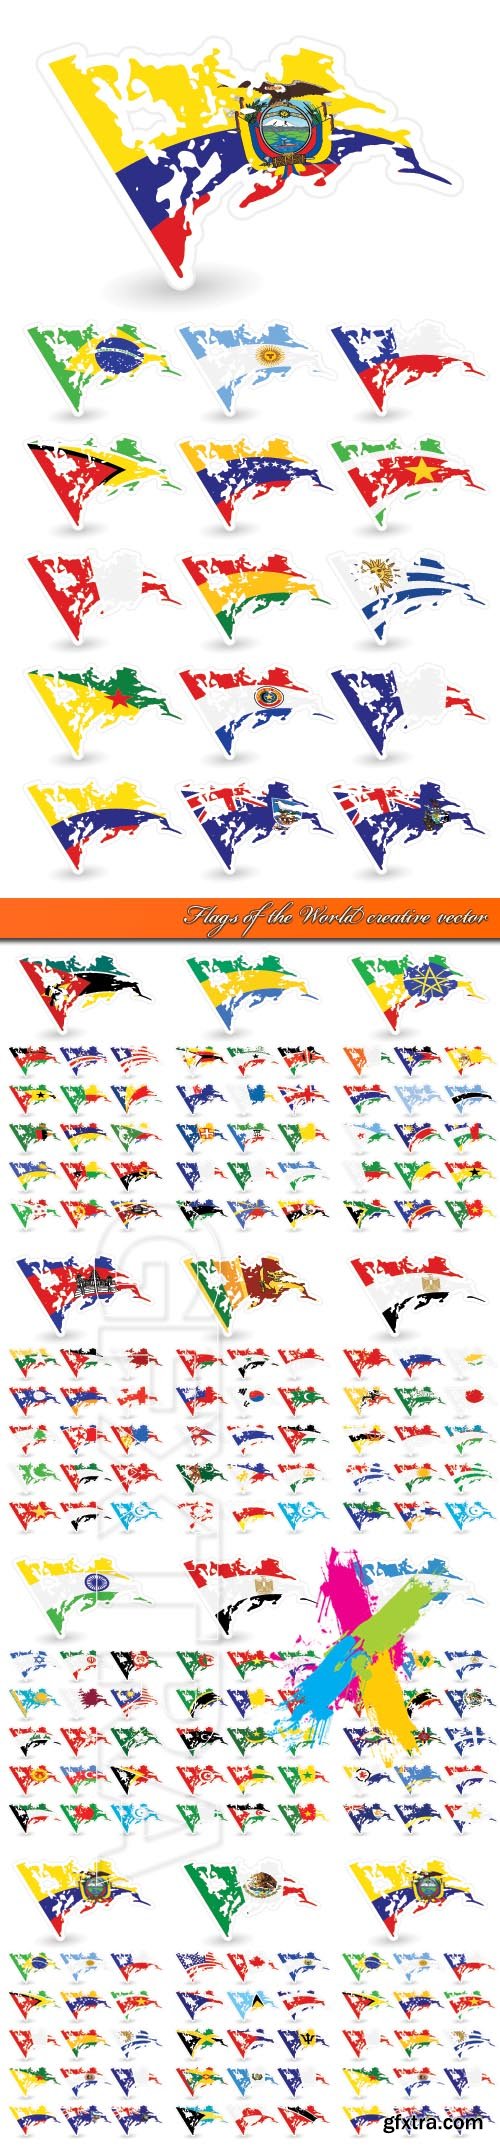 Flags of the World creative vector